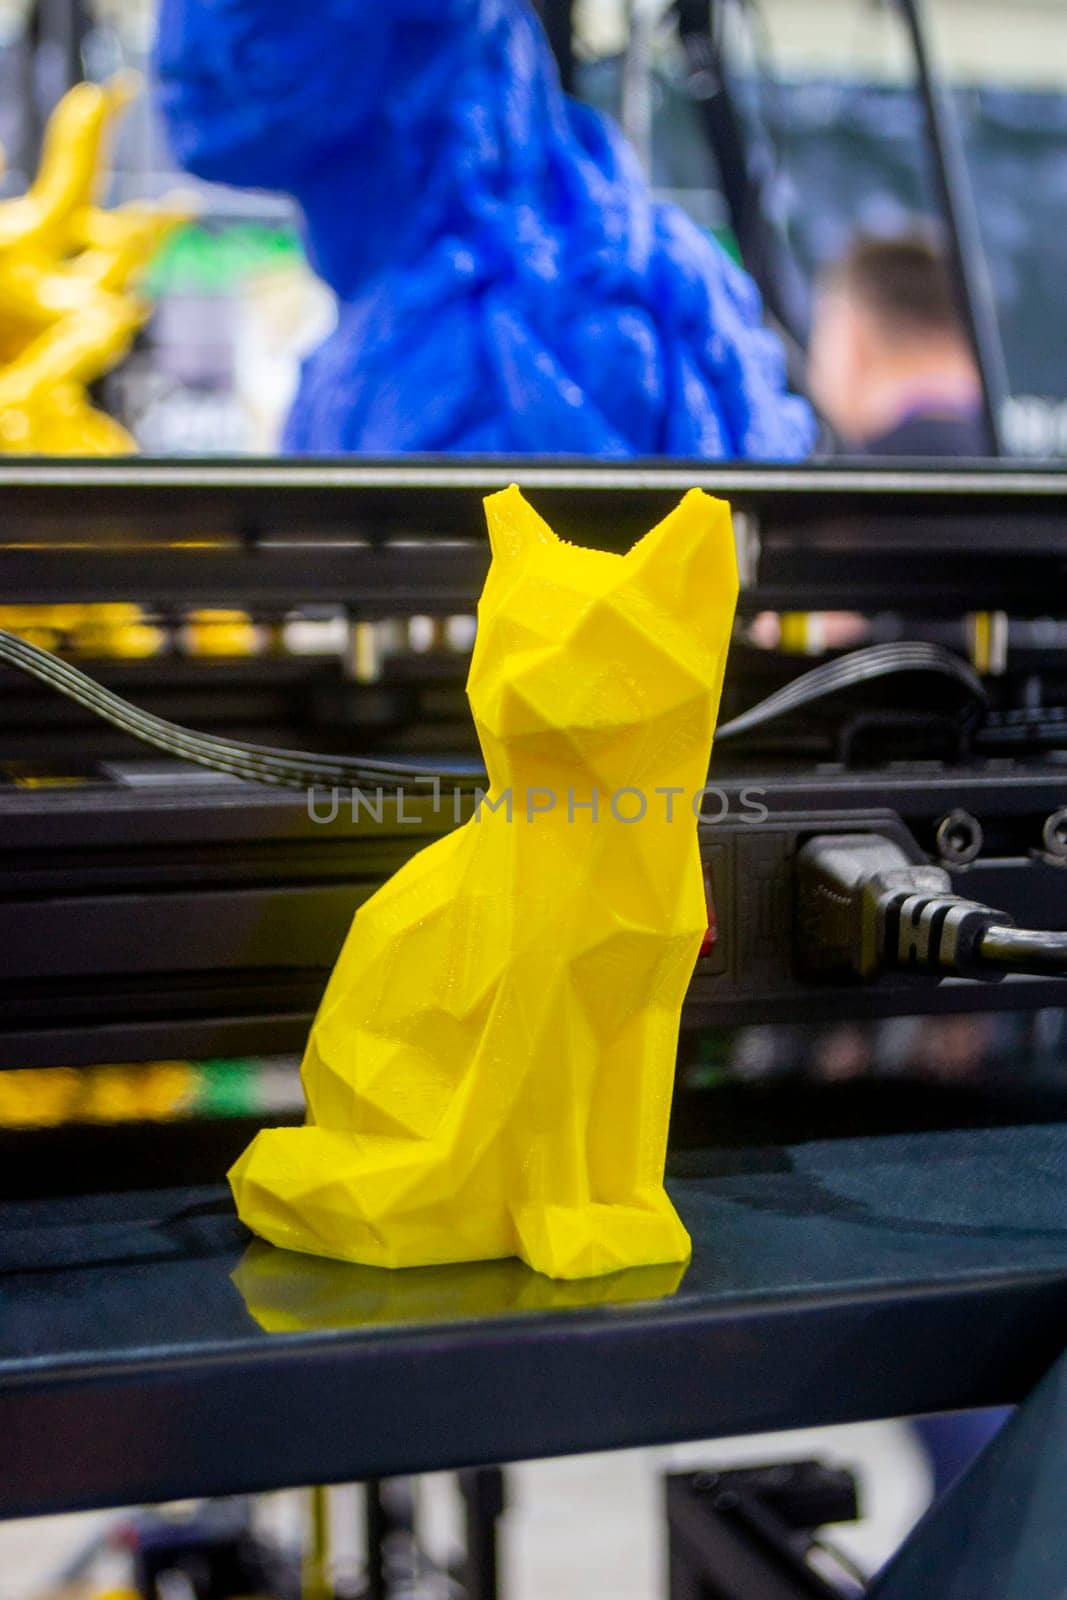 Abstract models printed on 3D printer. 3D printer created object from molten plastic. Modern three-dimensional printing technologies. 3D printer and 3D printing. Innovation additive robotic technology